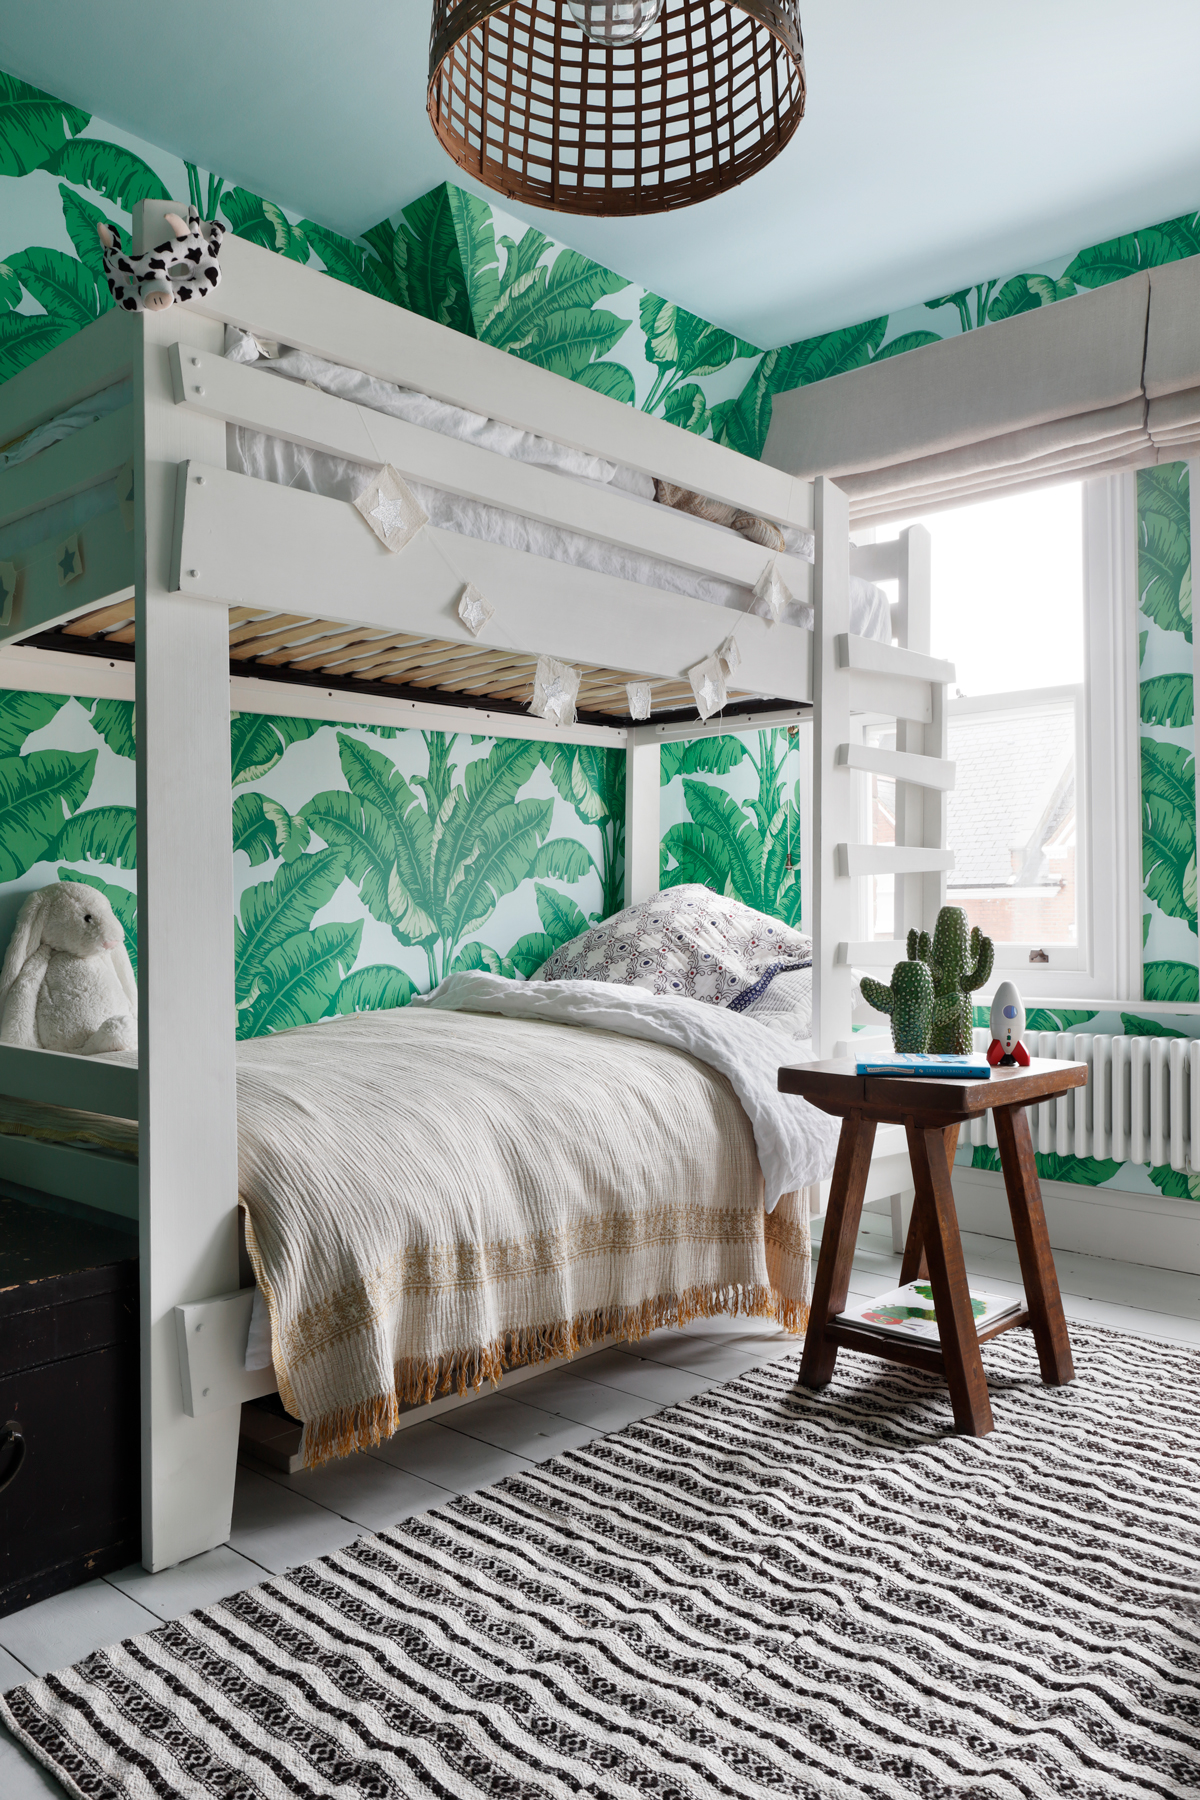 Boys bedroom with tropical wallpaper